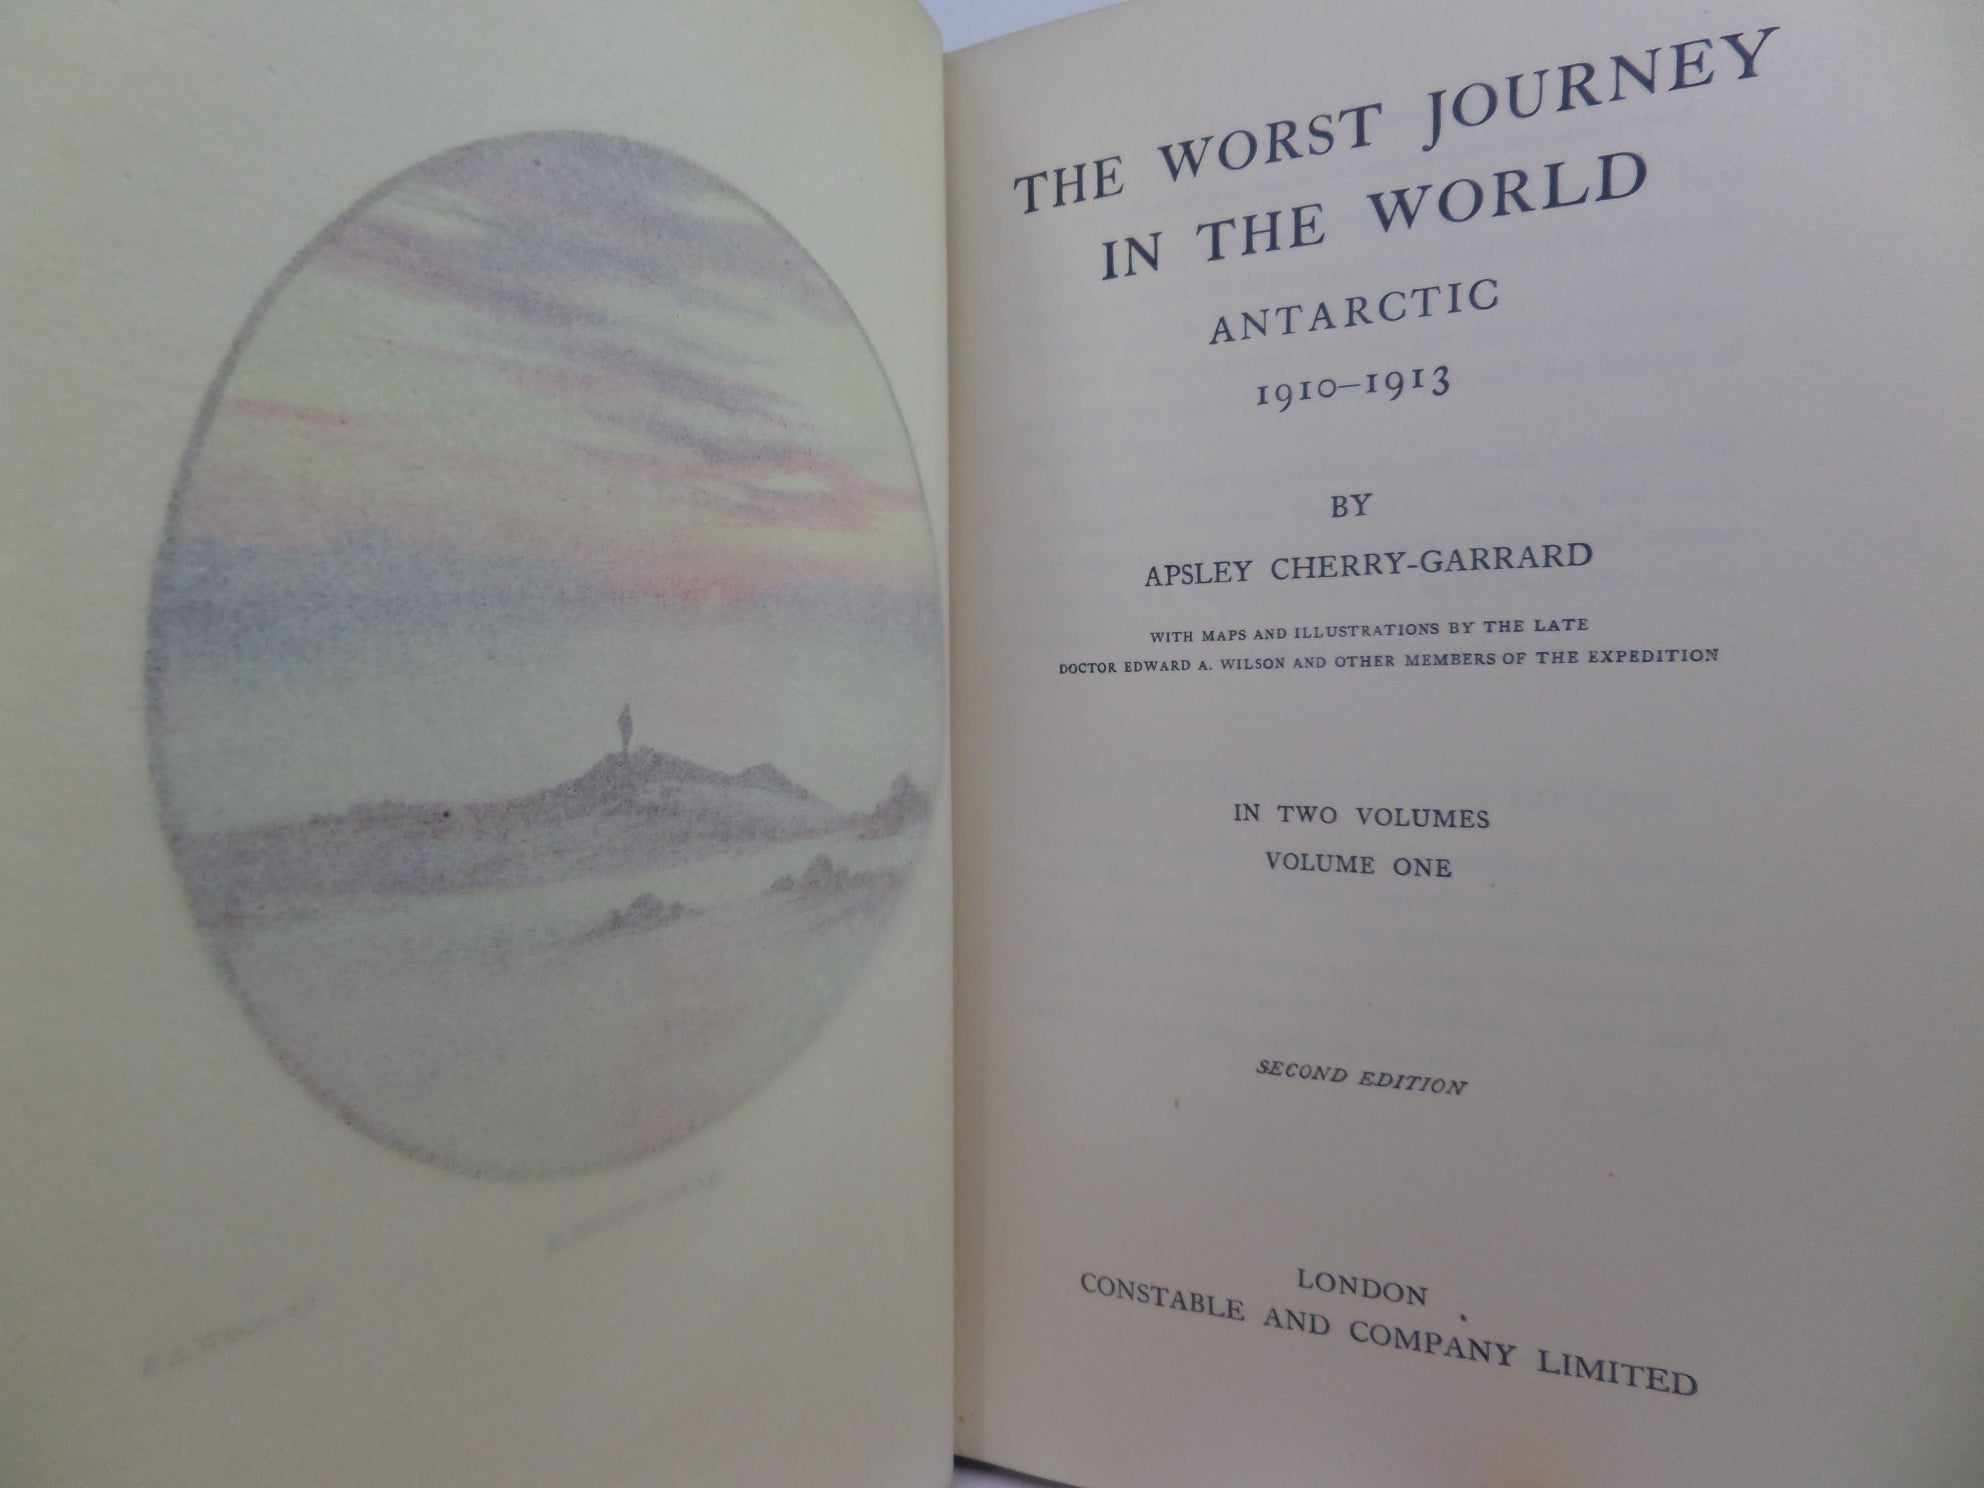 THE WORST JOURNEY IN THE WORLD BY APSLEY CHERRY-GARRARD 1929 SECOND EDITION